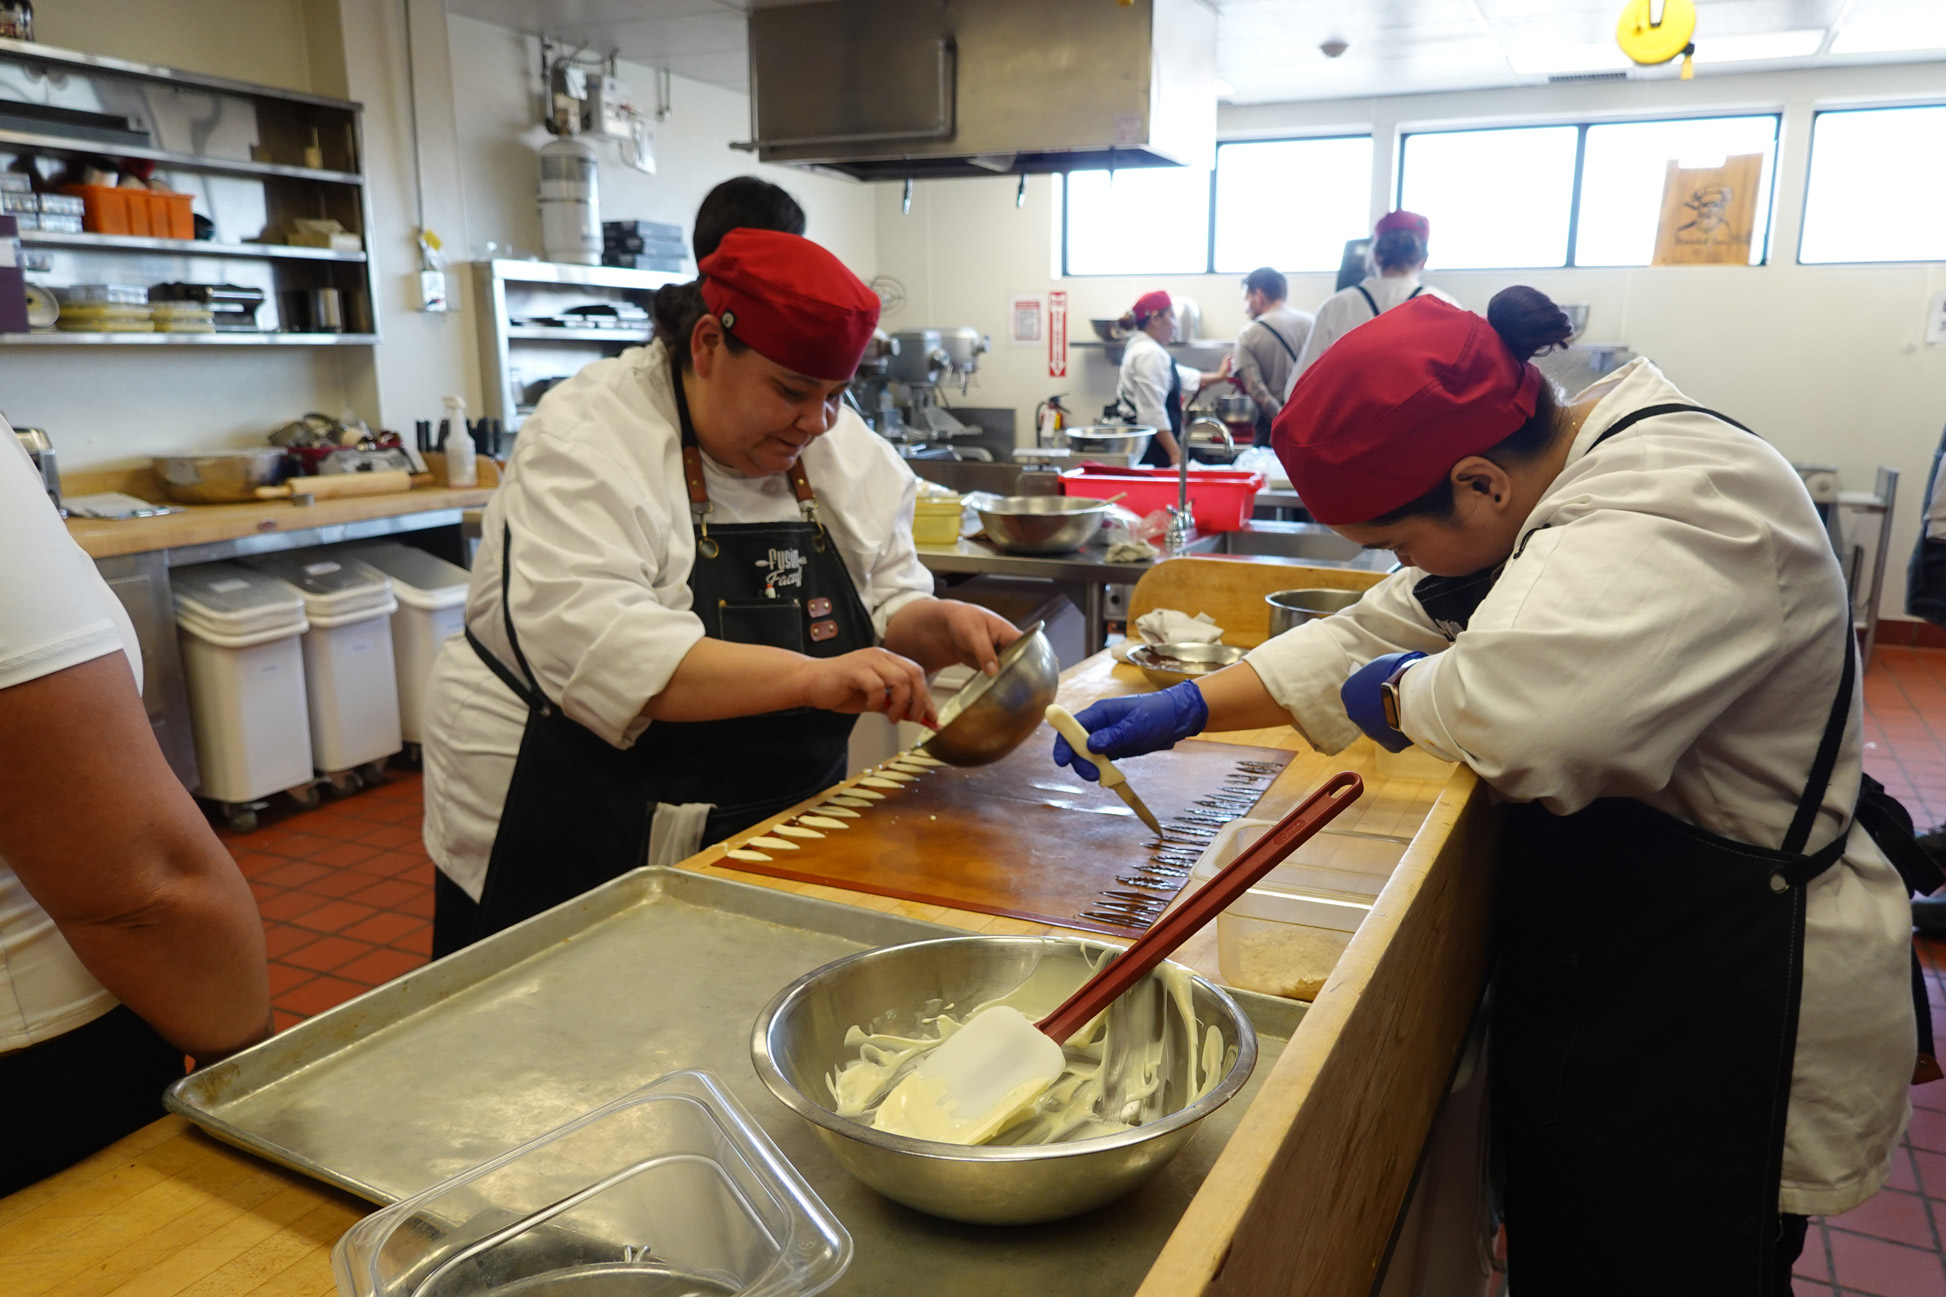 two chefs in red hat making pastries